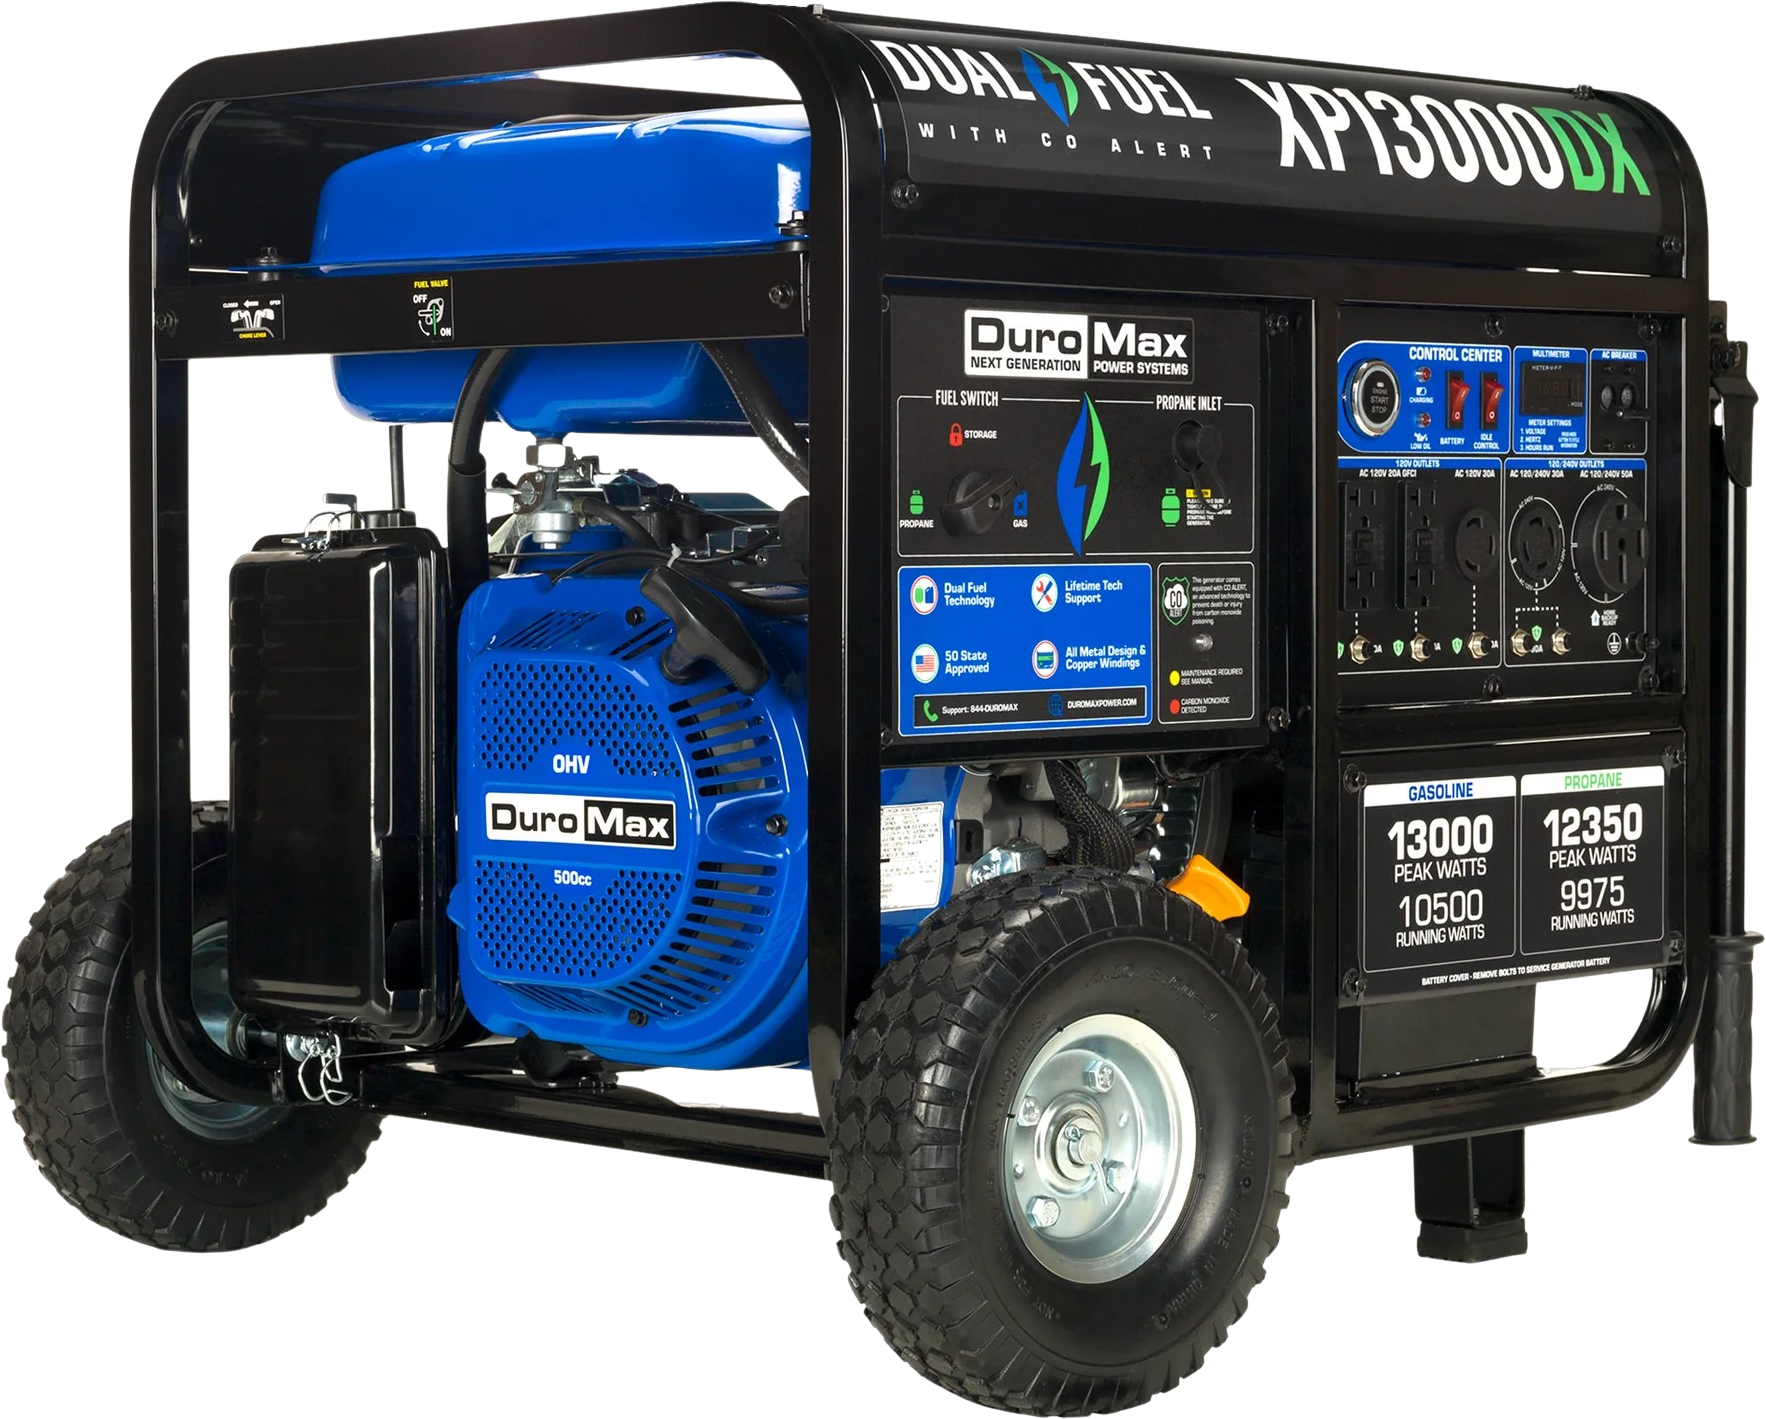 Duromax, DuroMax XP13000DX 10500W/13000W Dual Fuel Gas Propane Generator with Electric Start and CO Alert New